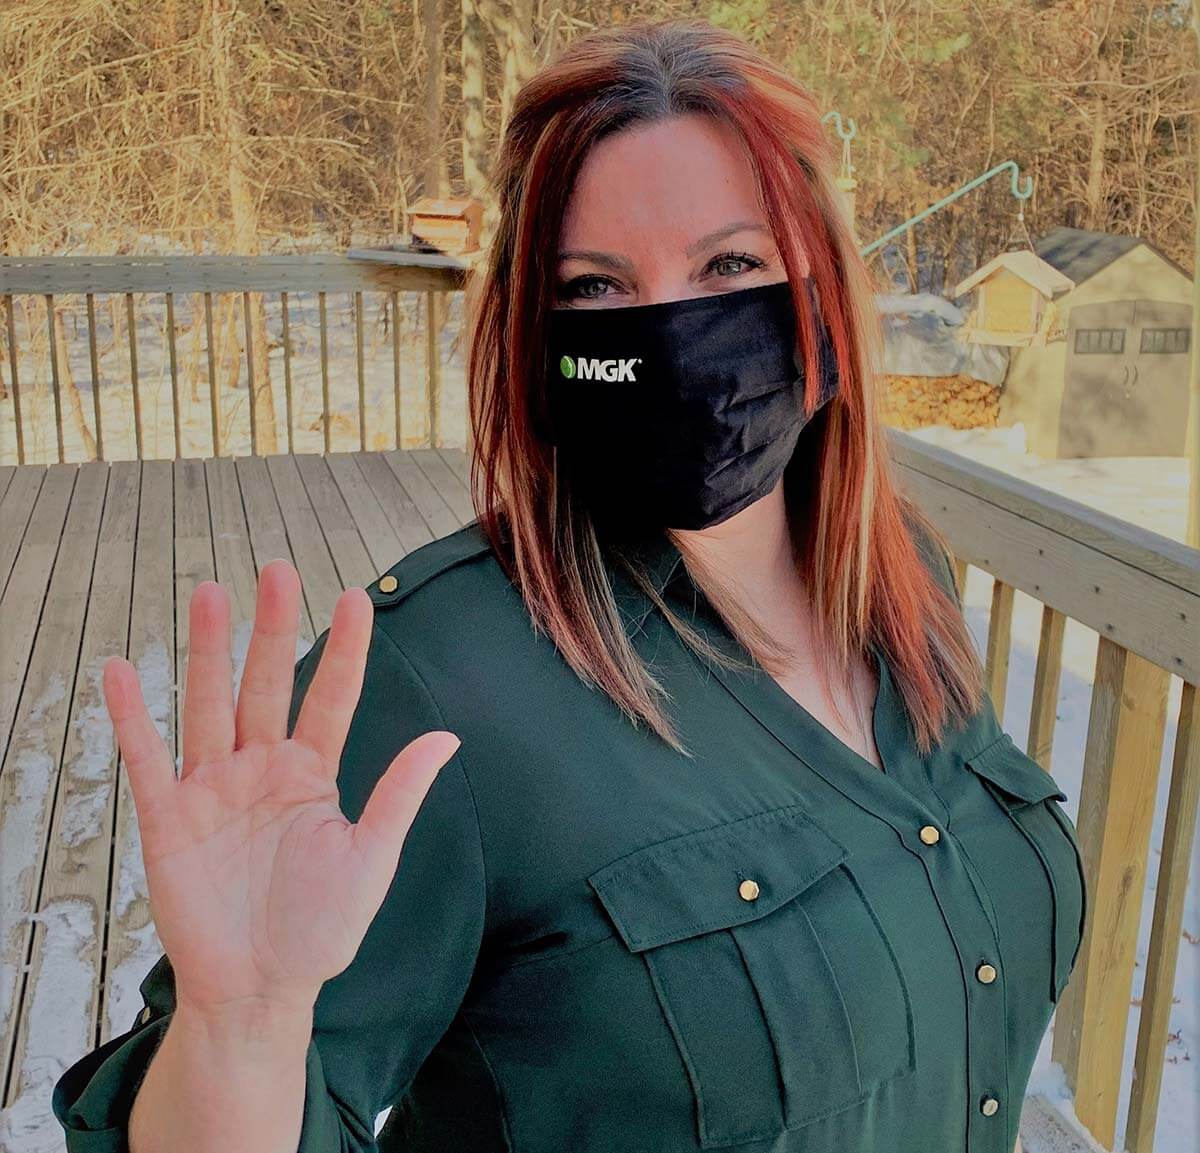 Lindsay Sillman - International Women's Day pose with hand up, wearing MGK branded mask